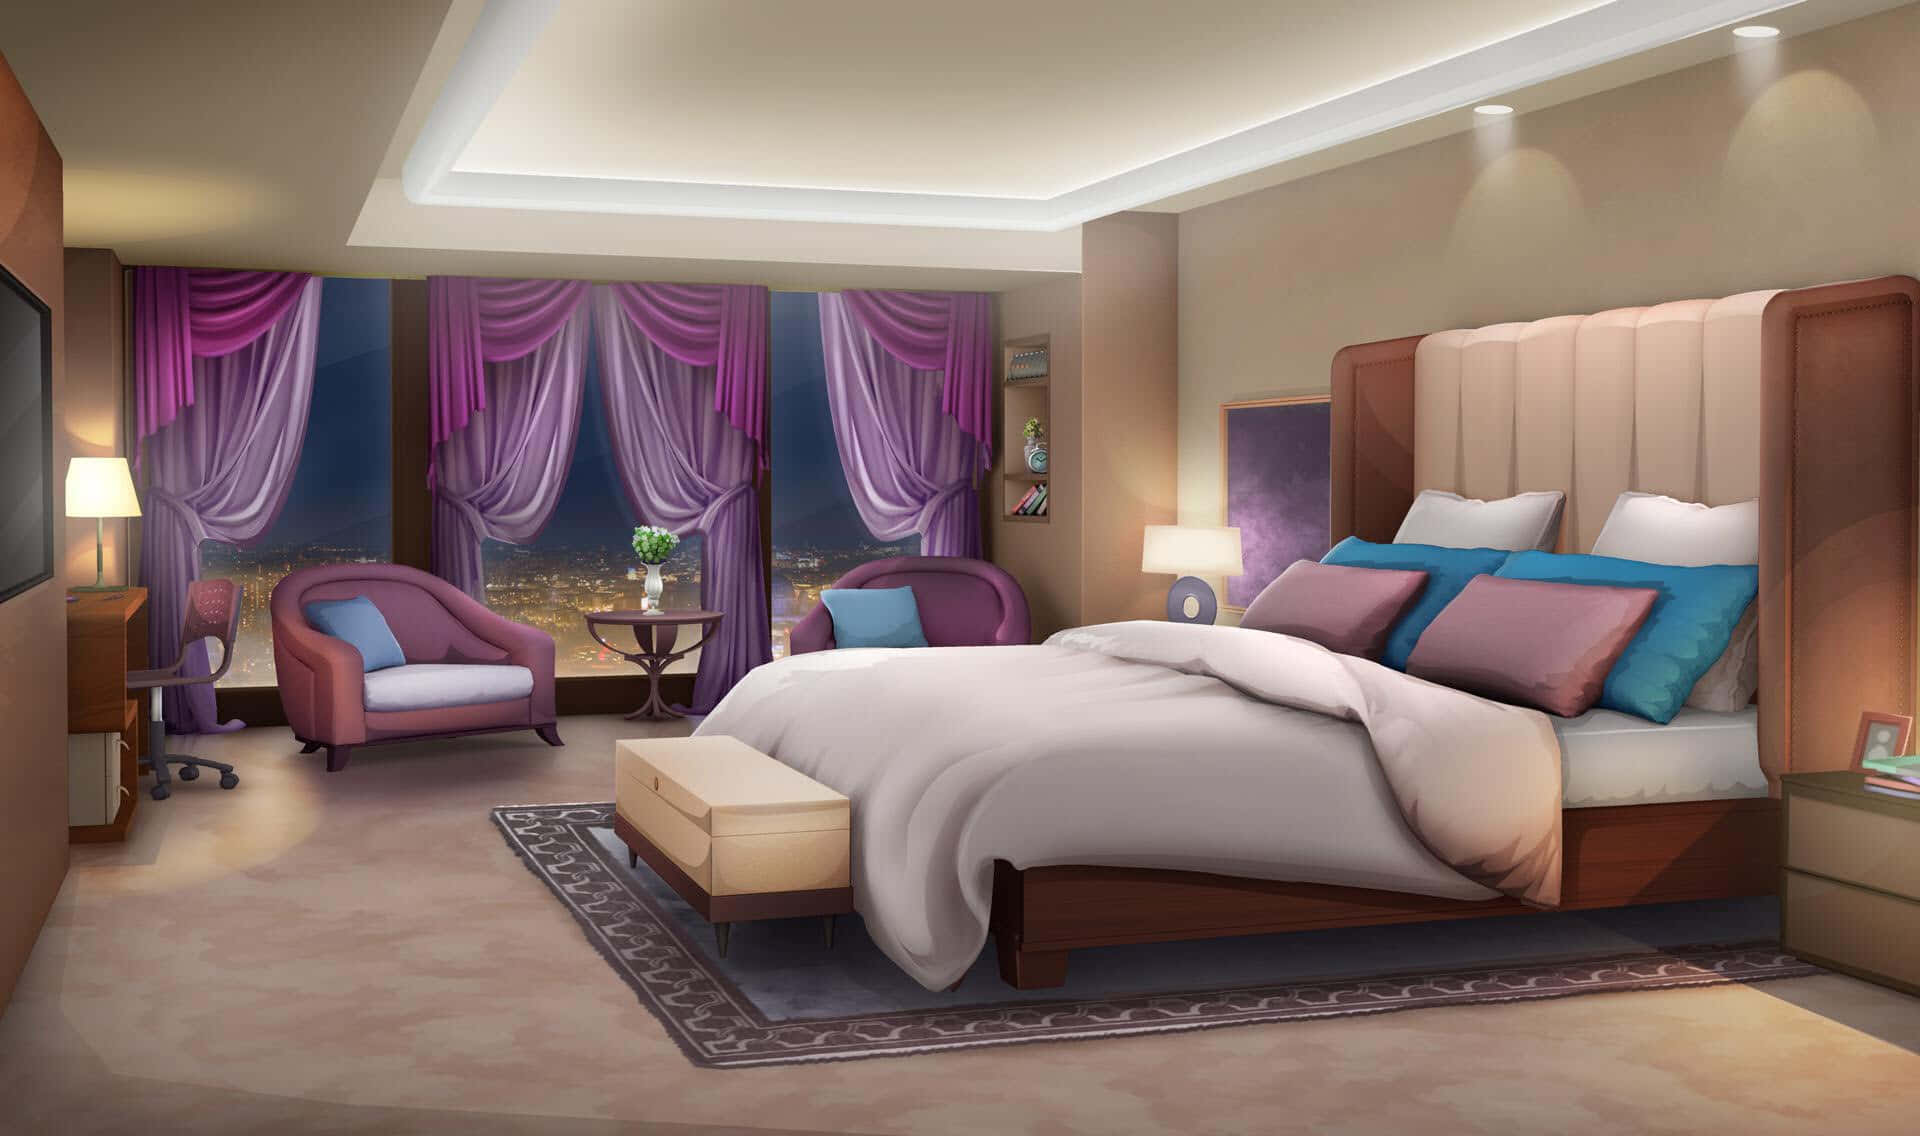 Hotel - VN Background by Vui-Huynh on DeviantArt